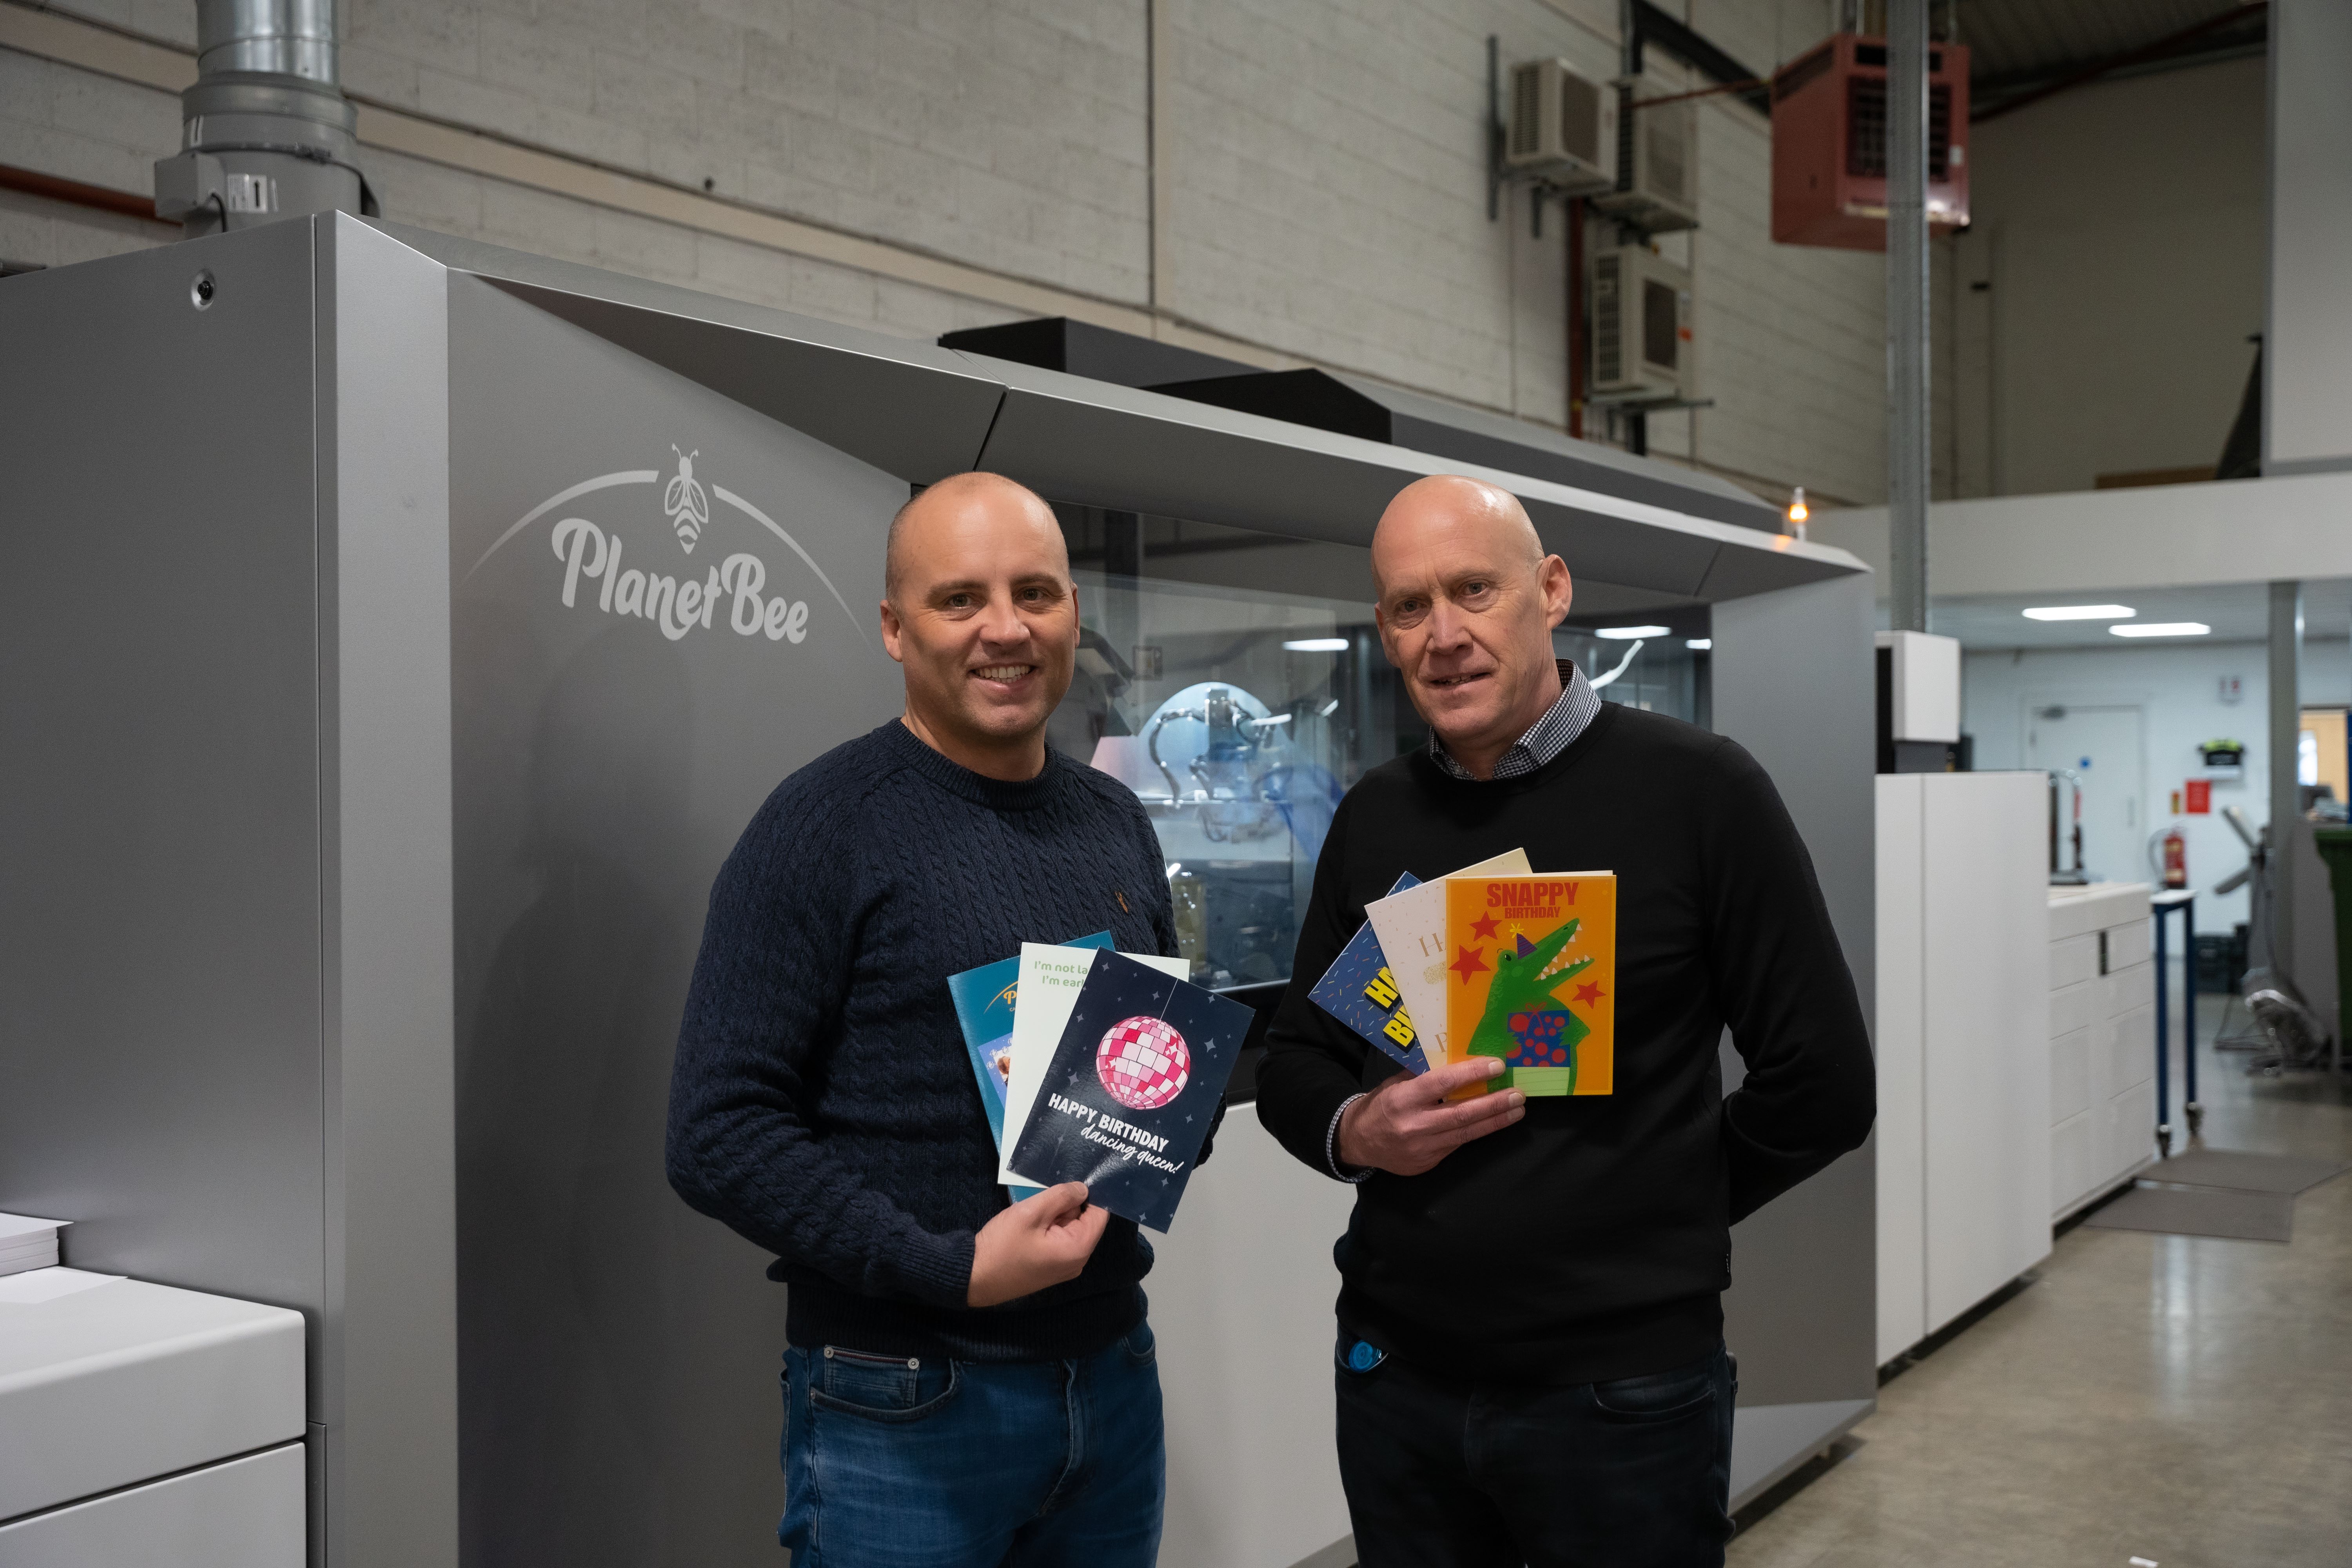 planet-bee-cards-l-r-jason-clough-md-of-propack-and-neil-lloyd-founder-and-ceo-of-propack.jpg